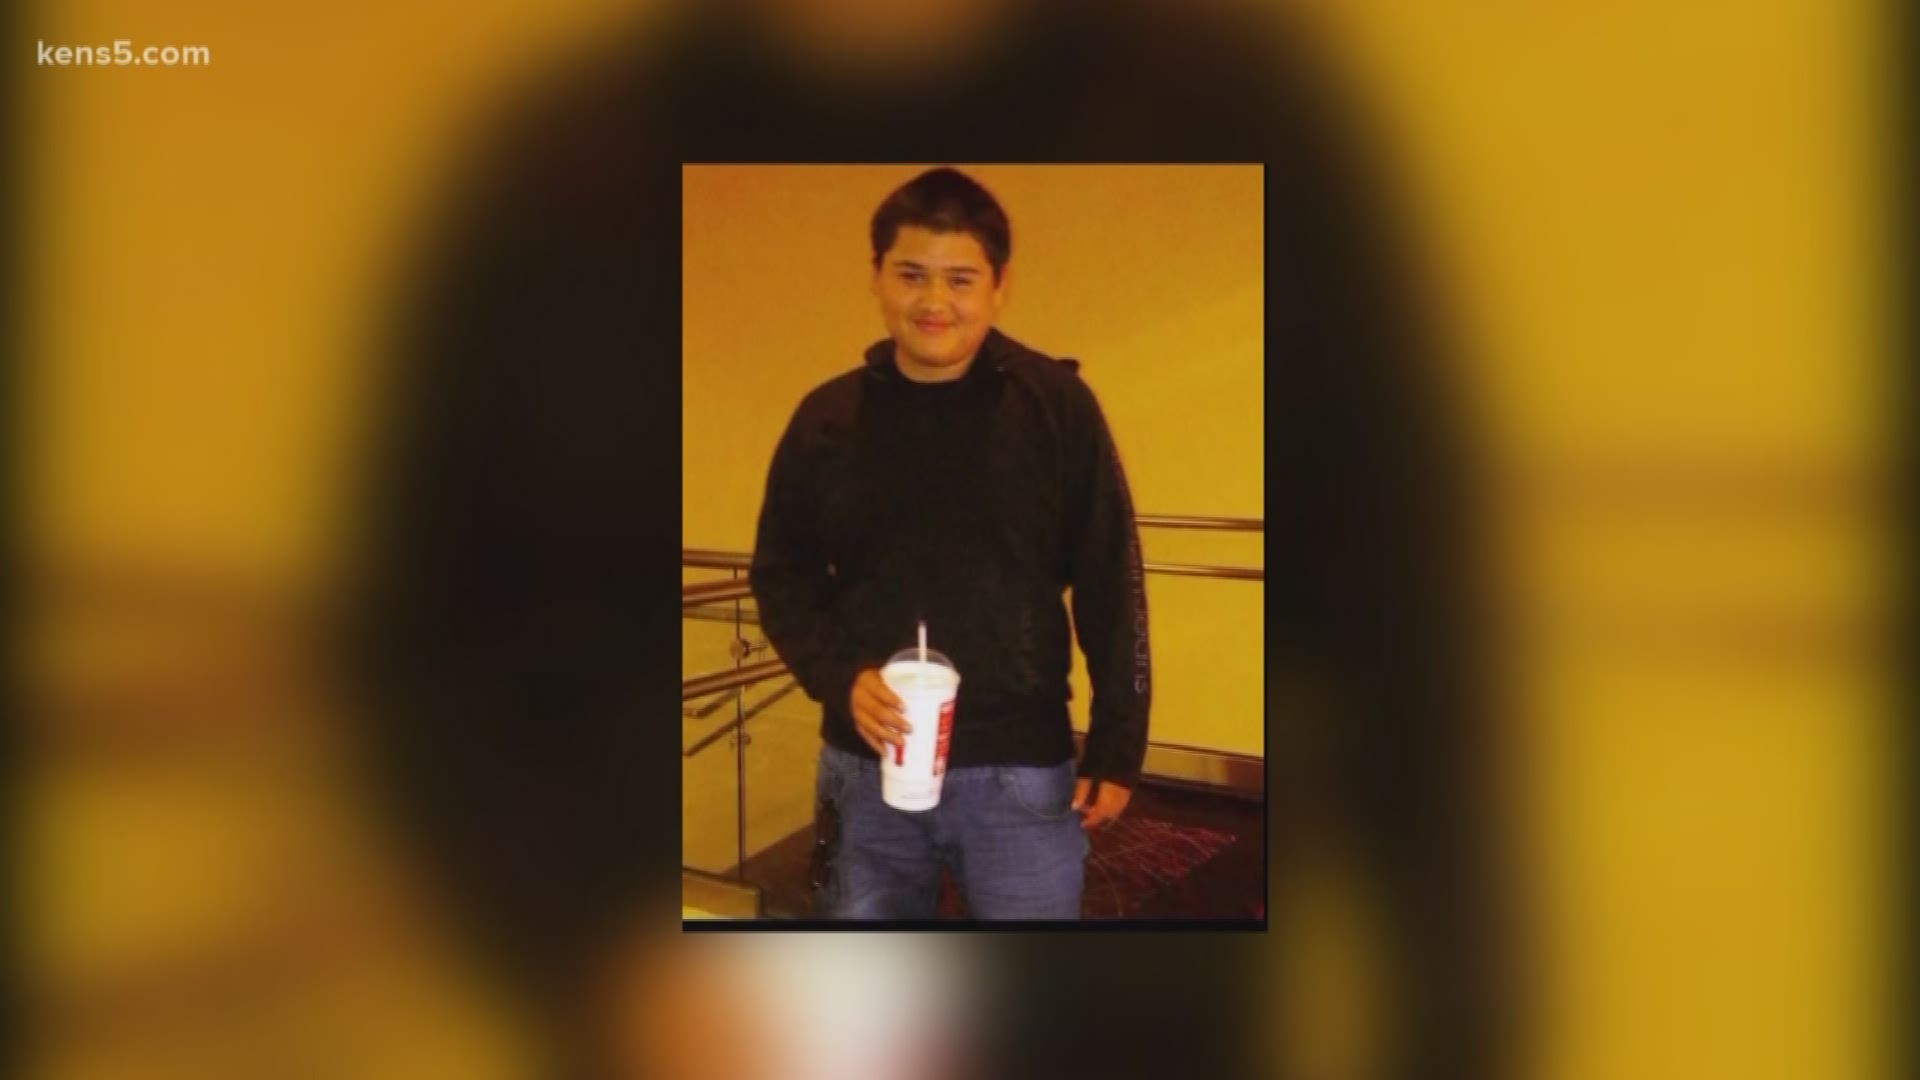 The mother of Fabian Ramirez, the teen shot and killed in Kirby, is struggling to make sense of his sudden death.